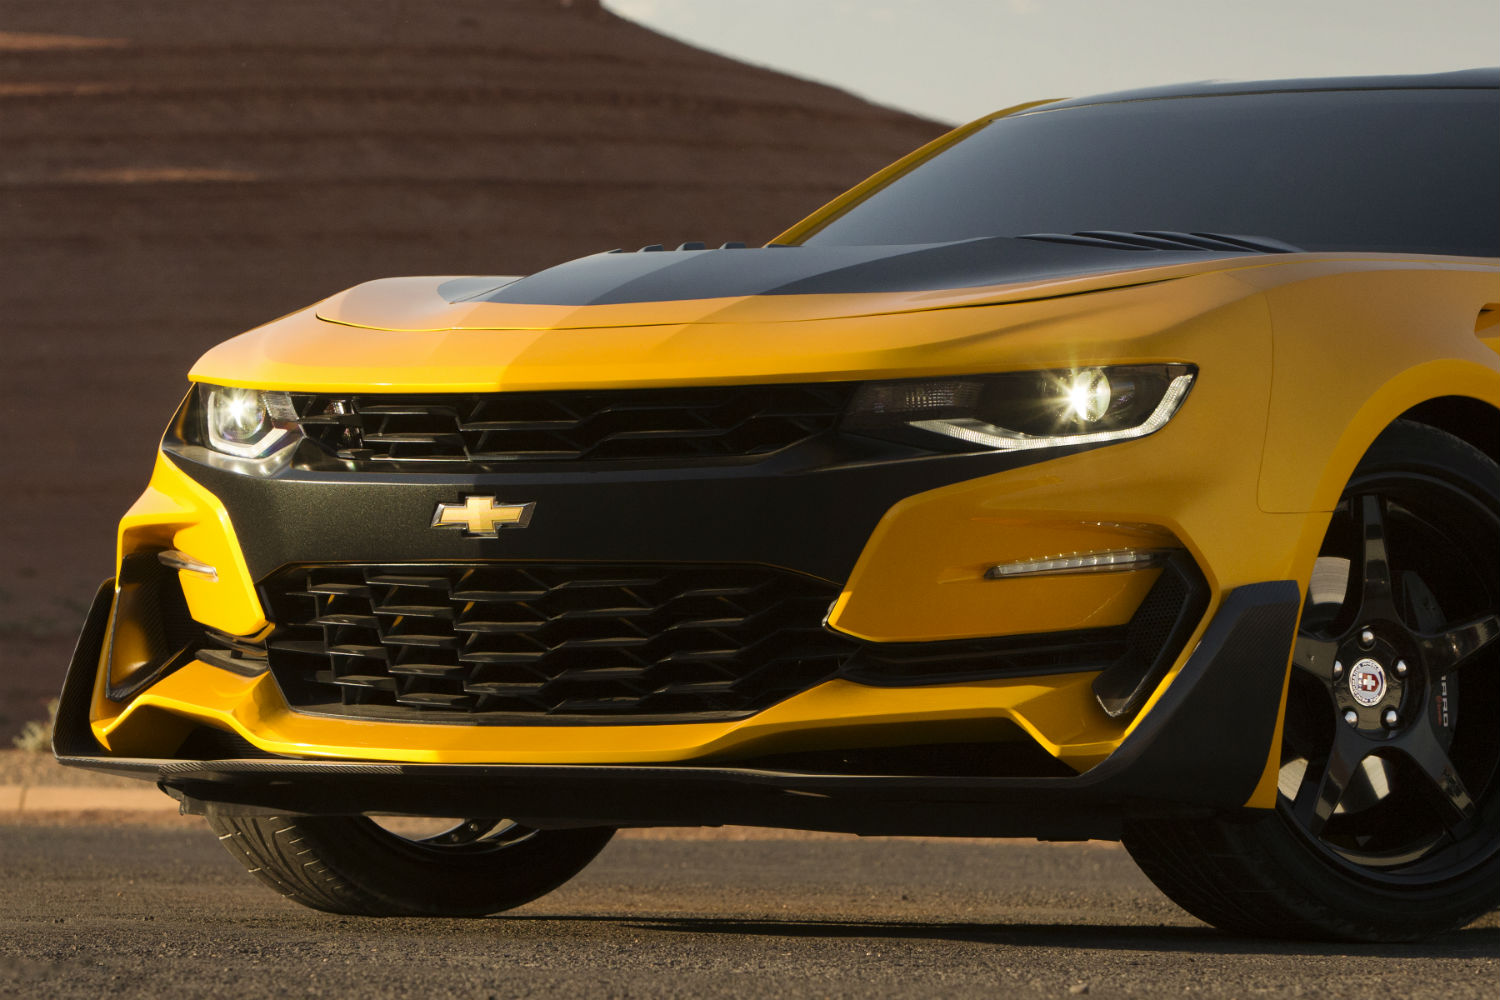 Bumblebee Gets An Upgrade For Transformers 5 | Digital Trends